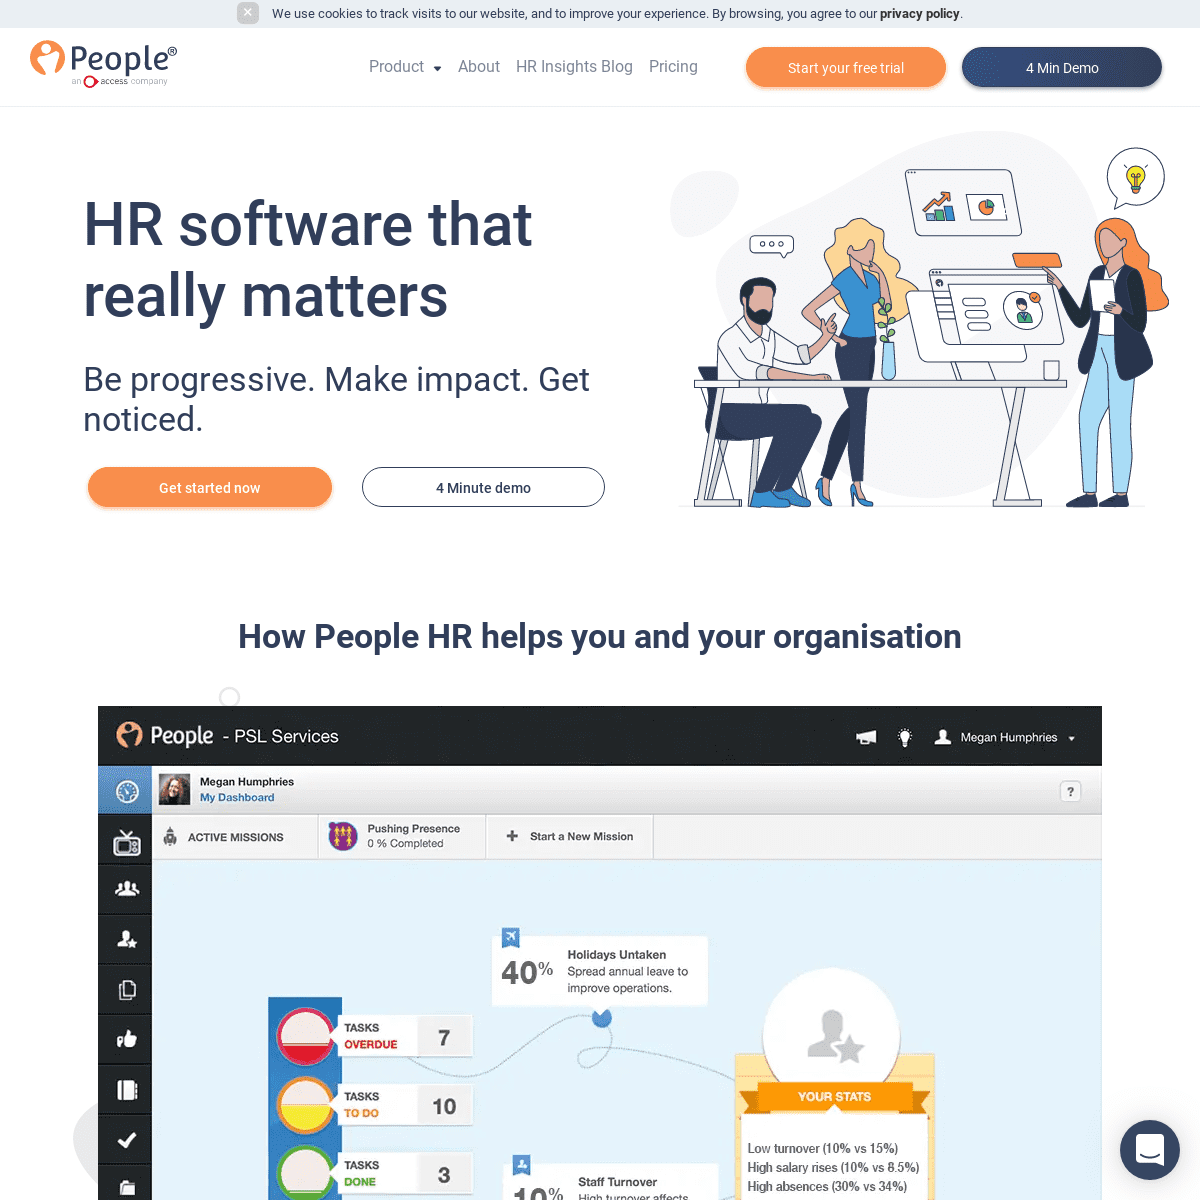 A complete backup of peoplehr.com